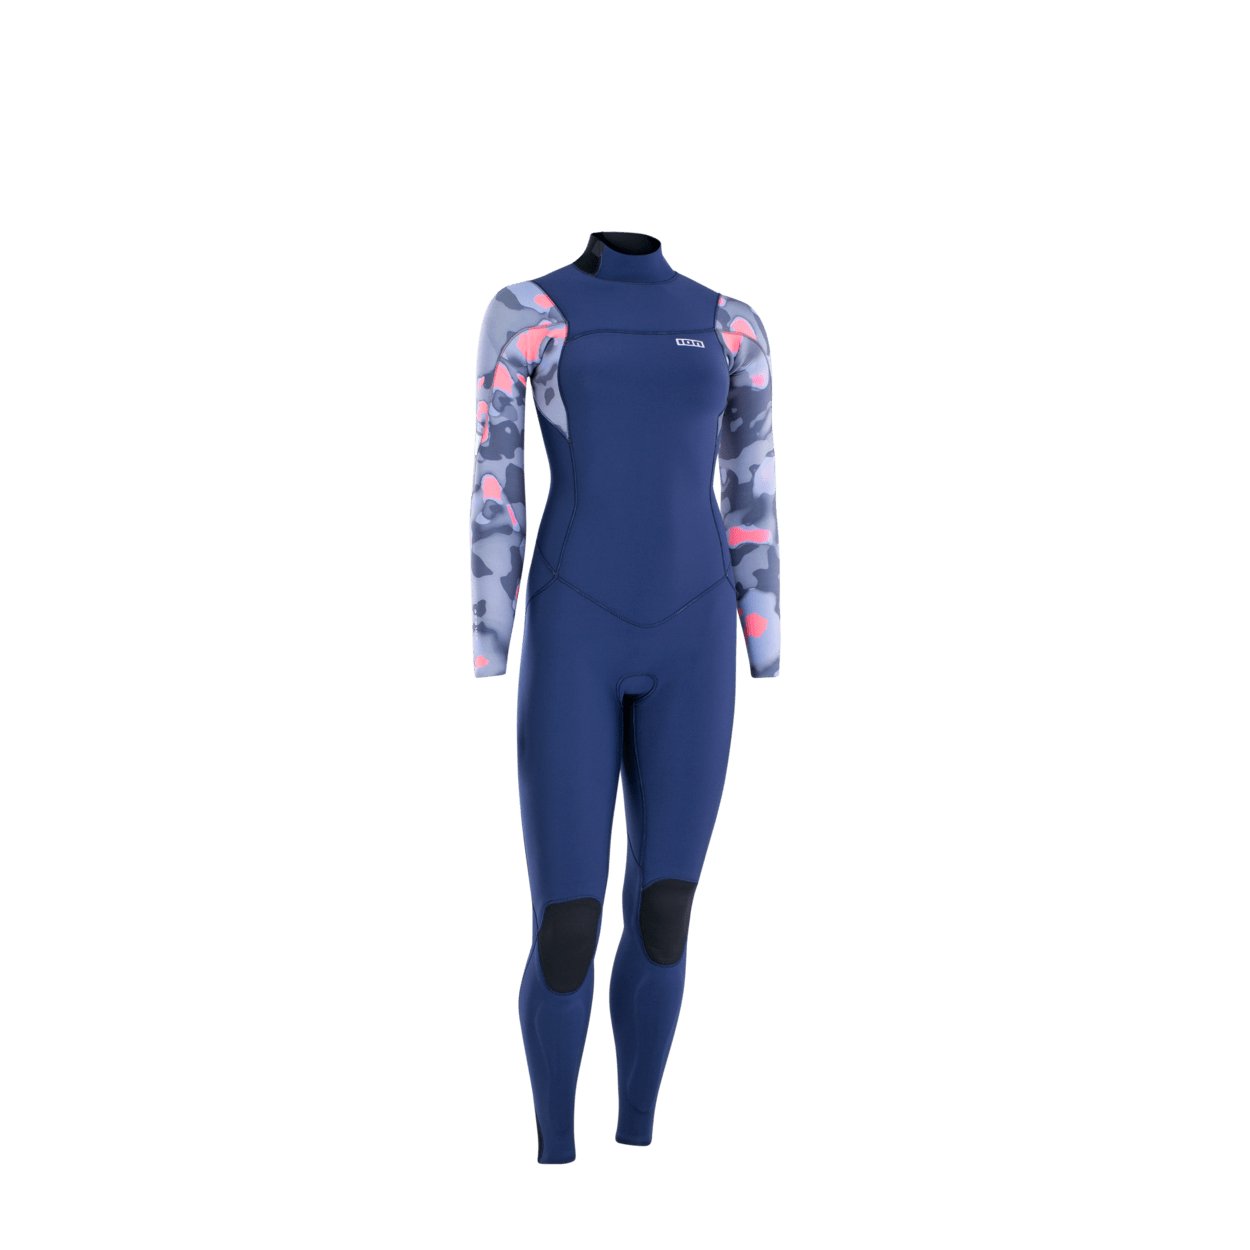 ION Amaze Amp 4/3 Back Zip 2022 - Worthing Watersports - 9010583057514 - Wetsuits - ION Water